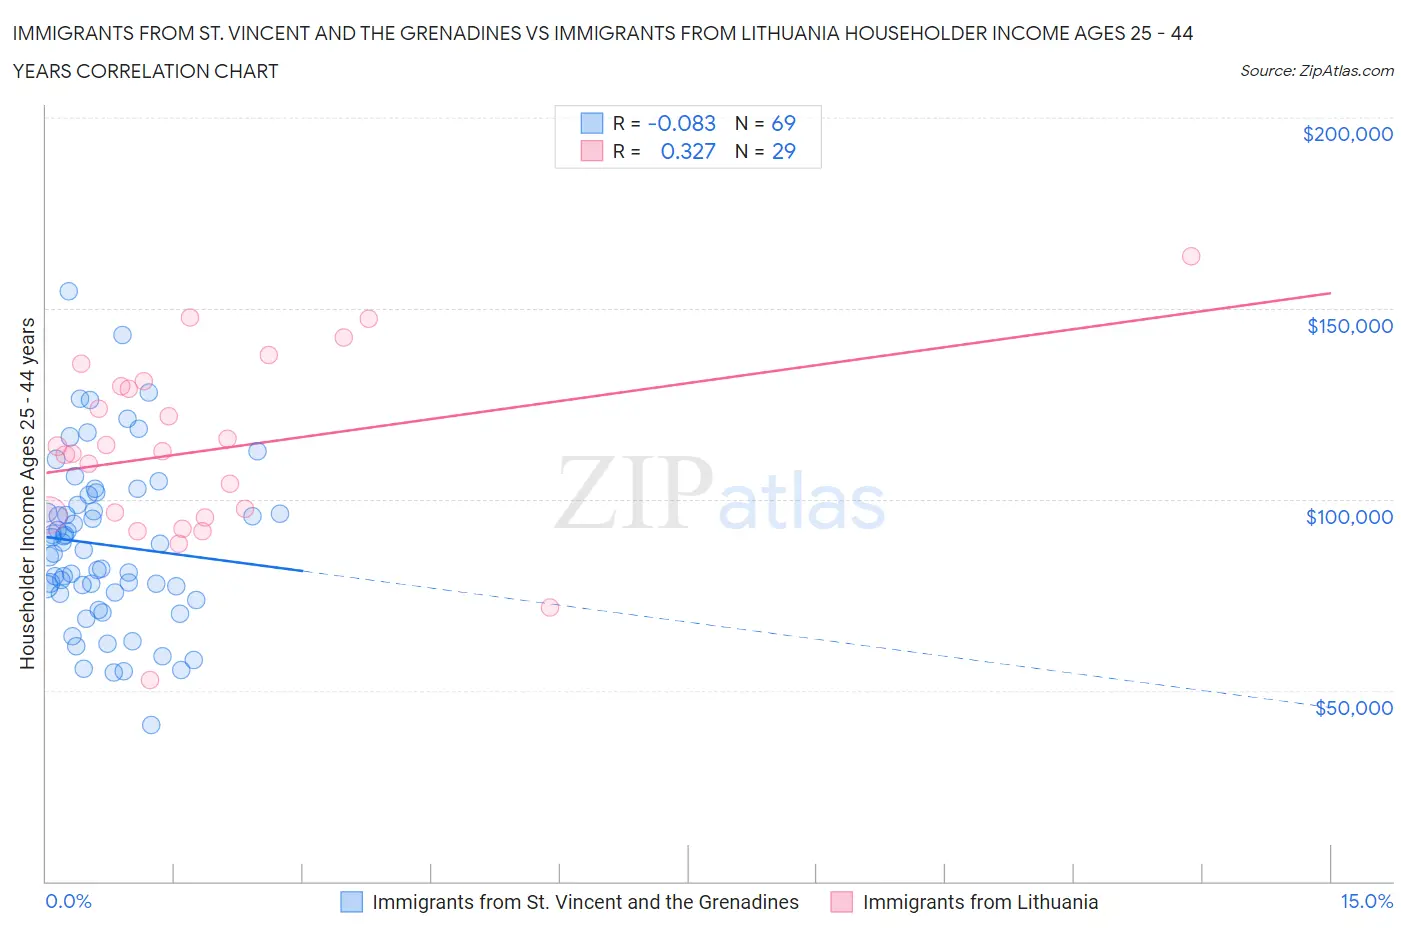 Immigrants from St. Vincent and the Grenadines vs Immigrants from Lithuania Householder Income Ages 25 - 44 years